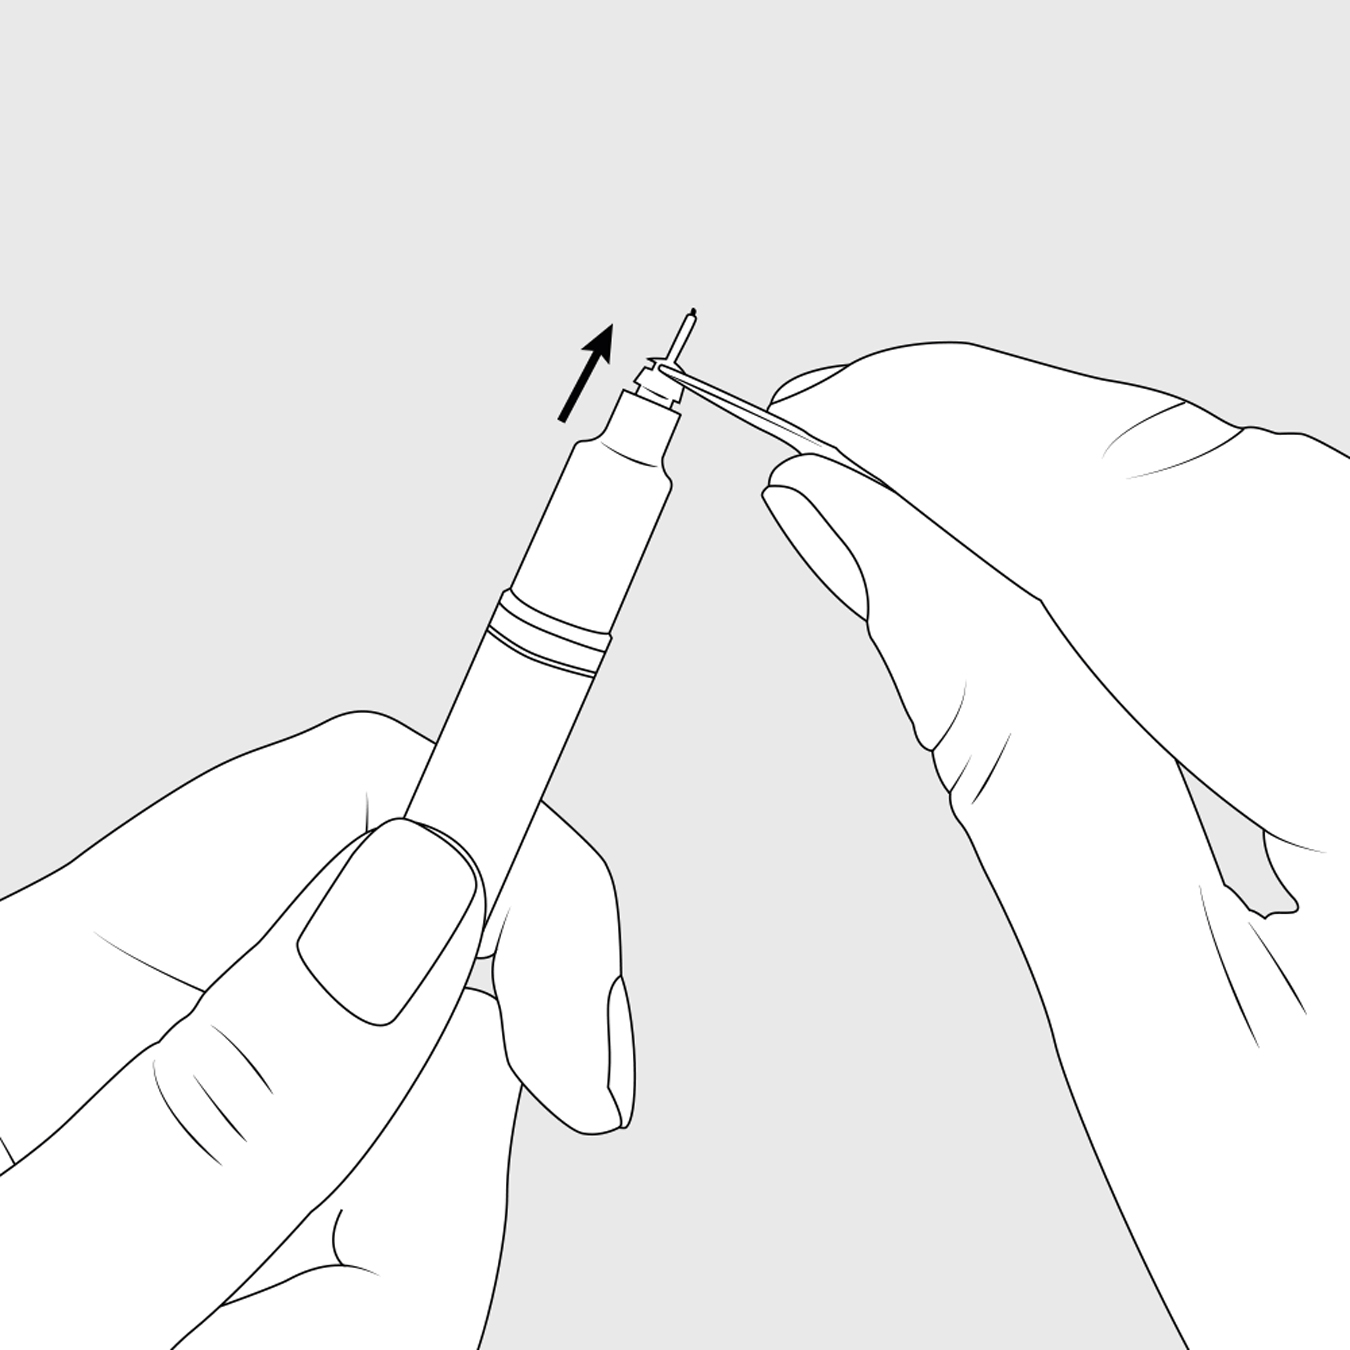 How to change nibs